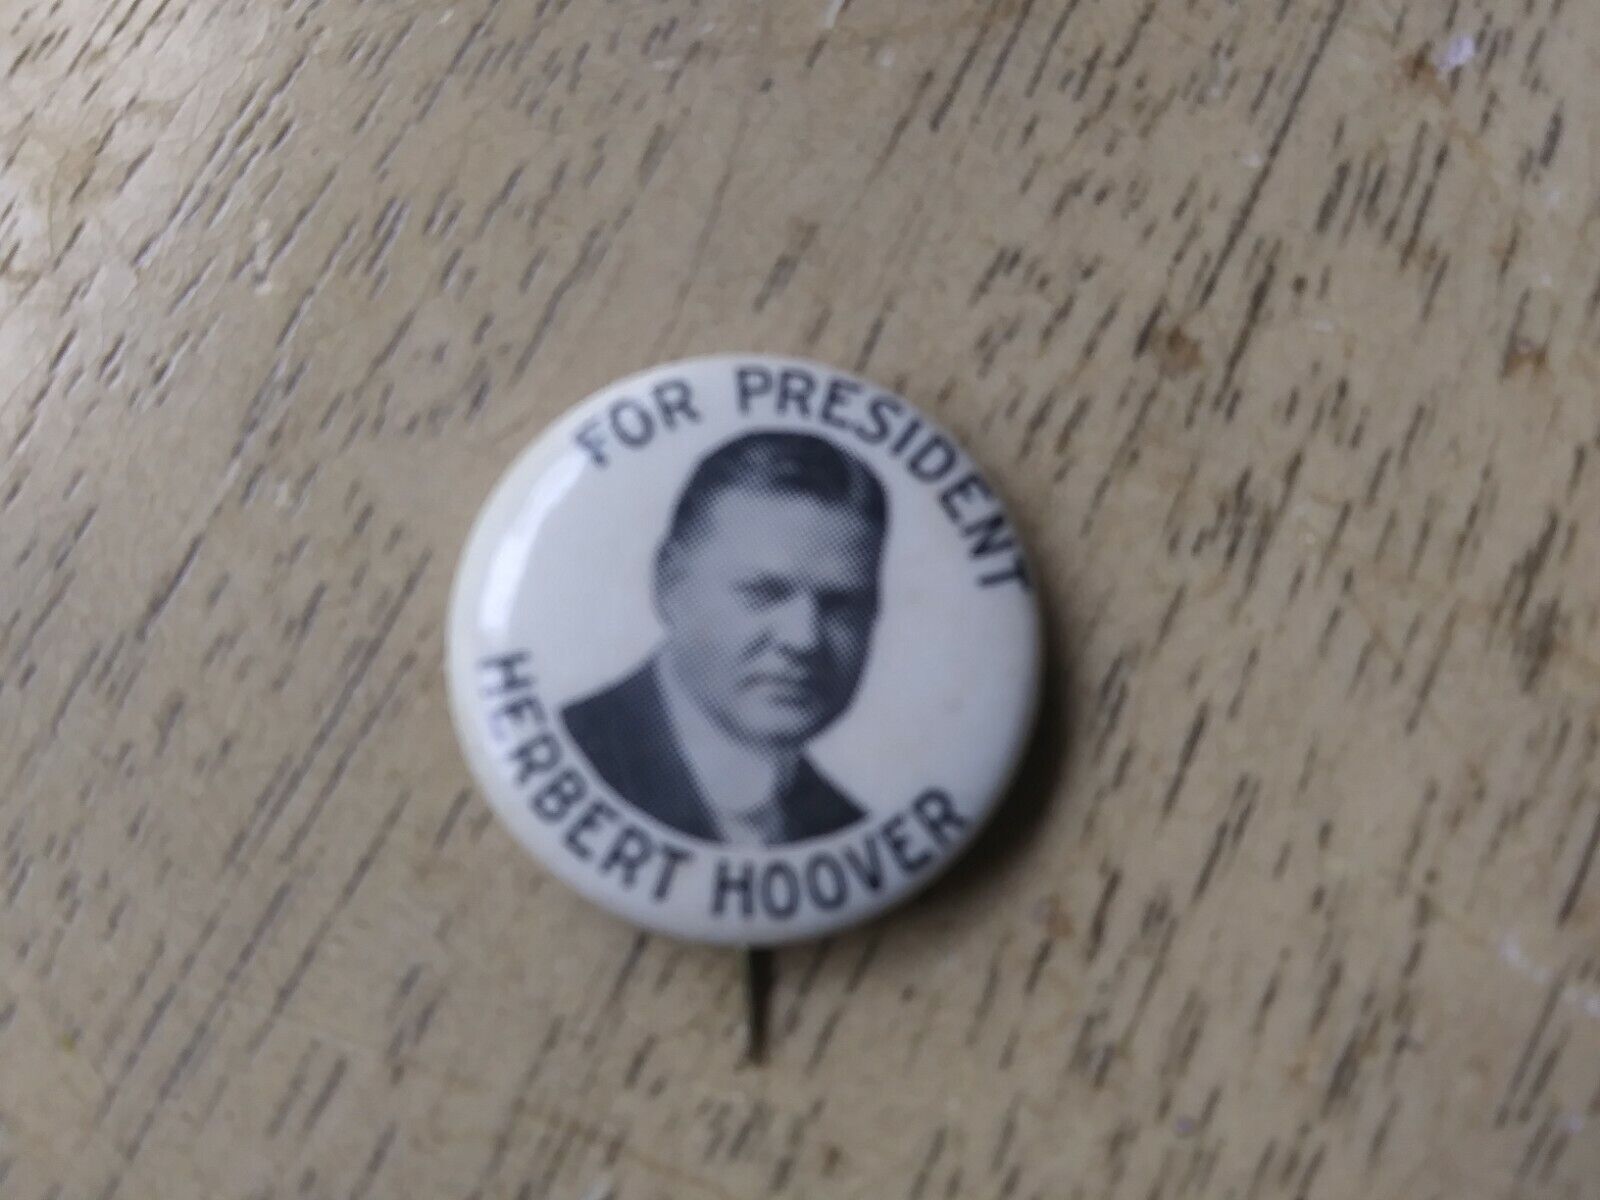 1928 Original Herbert Hoover Pin Back Campaign Button Picture For President